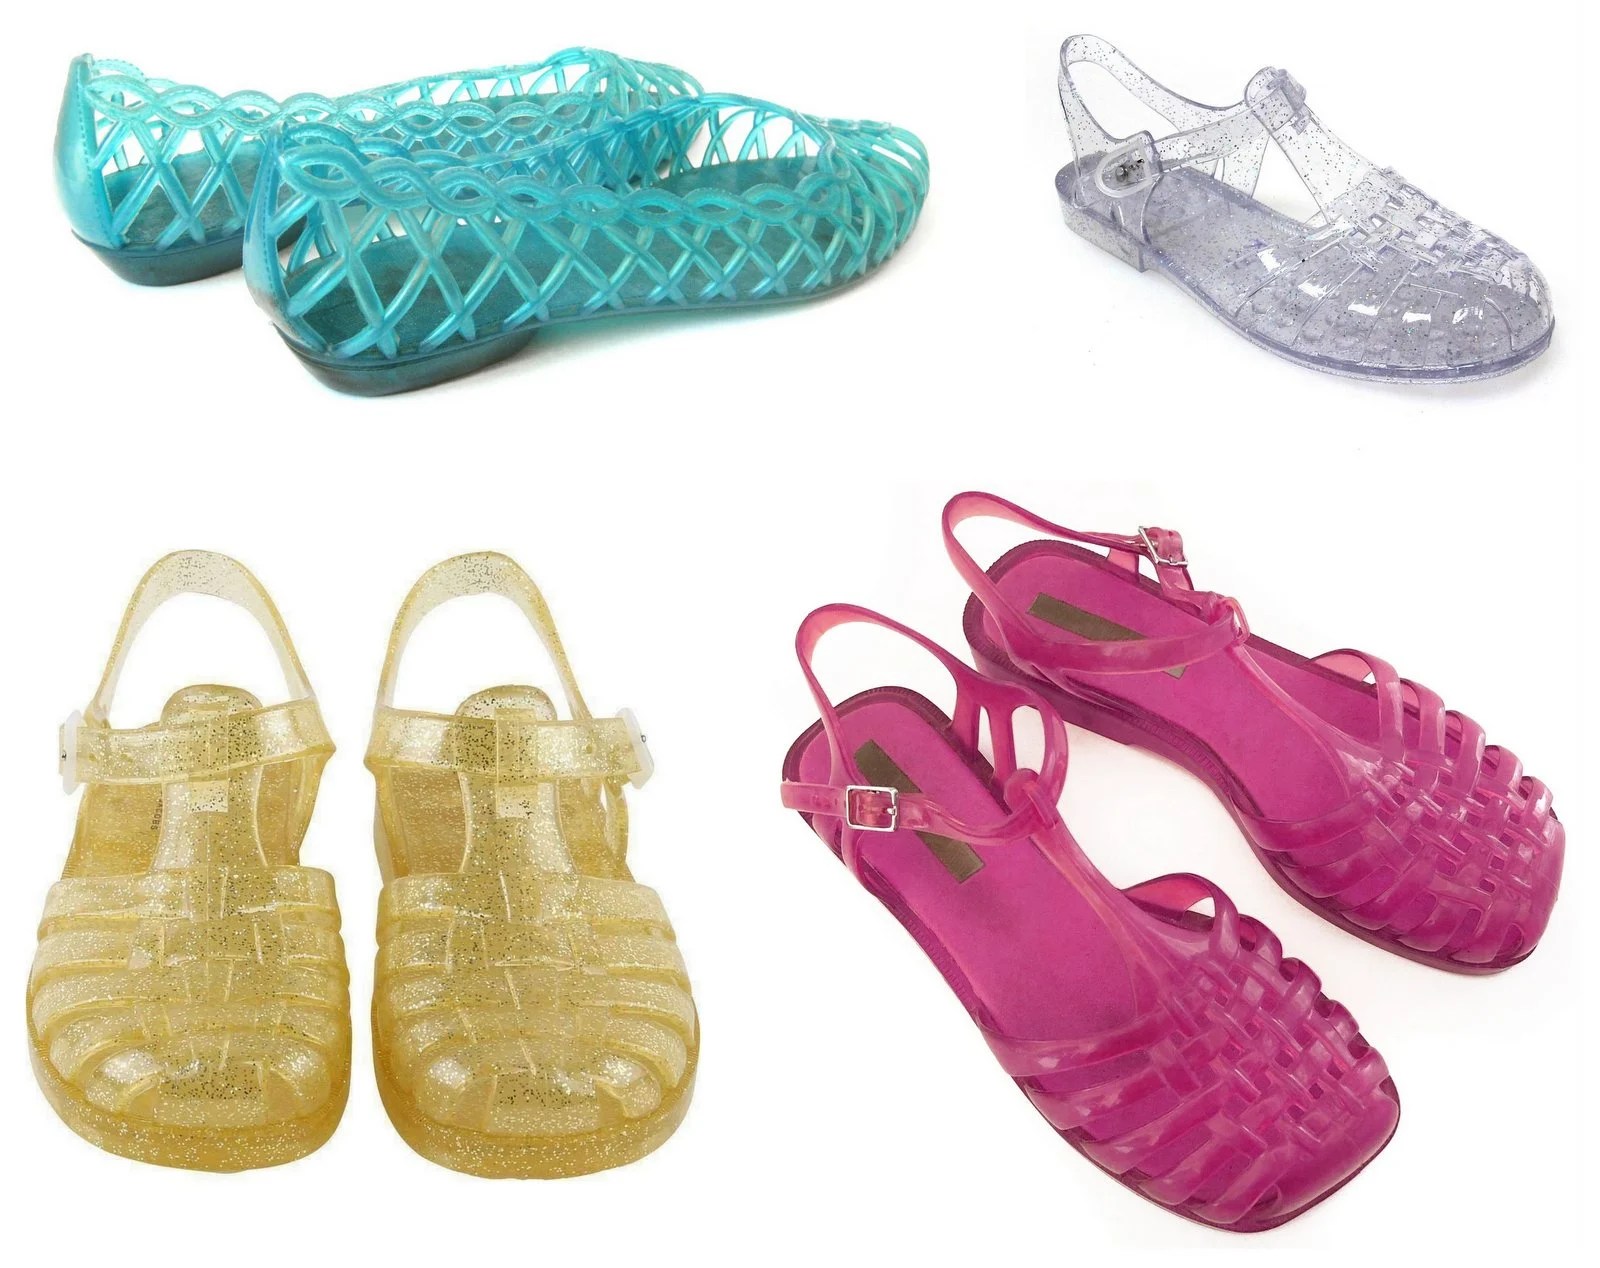 Get-your-jellies-on-Jelly-shoes-are-the-footwear-of-summer-1980s.jpg